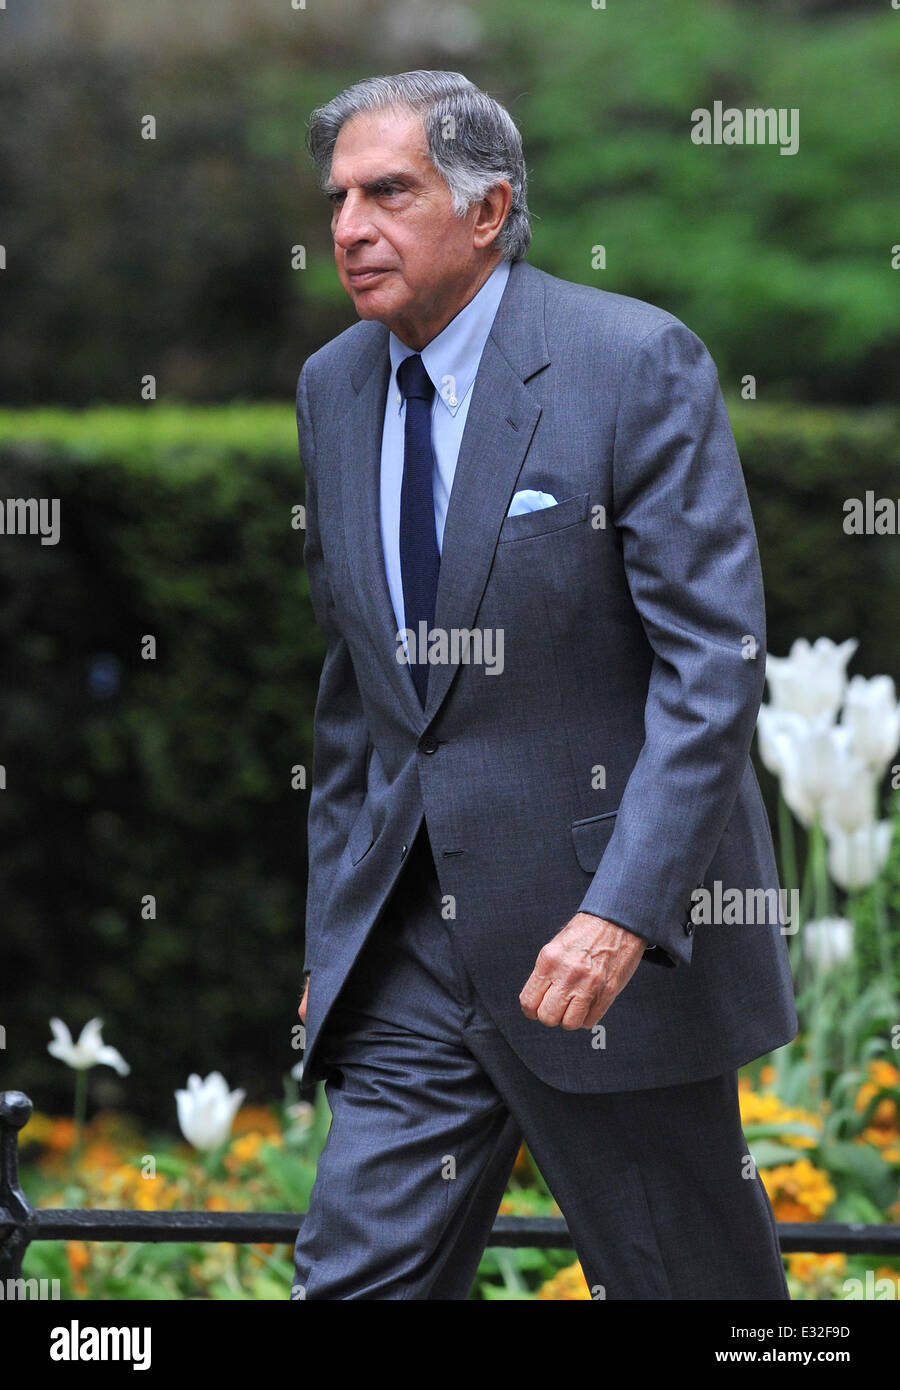 Business leaders arrive at 10 Downing Street for Business Advisory Group meeting with Prime Minister David Cameron. London, England - 20.05.13  Featuring: Ratan Tata,Chair,Tata Group Where: London, United Kingdom When: 20 May 2013om Stock Photo